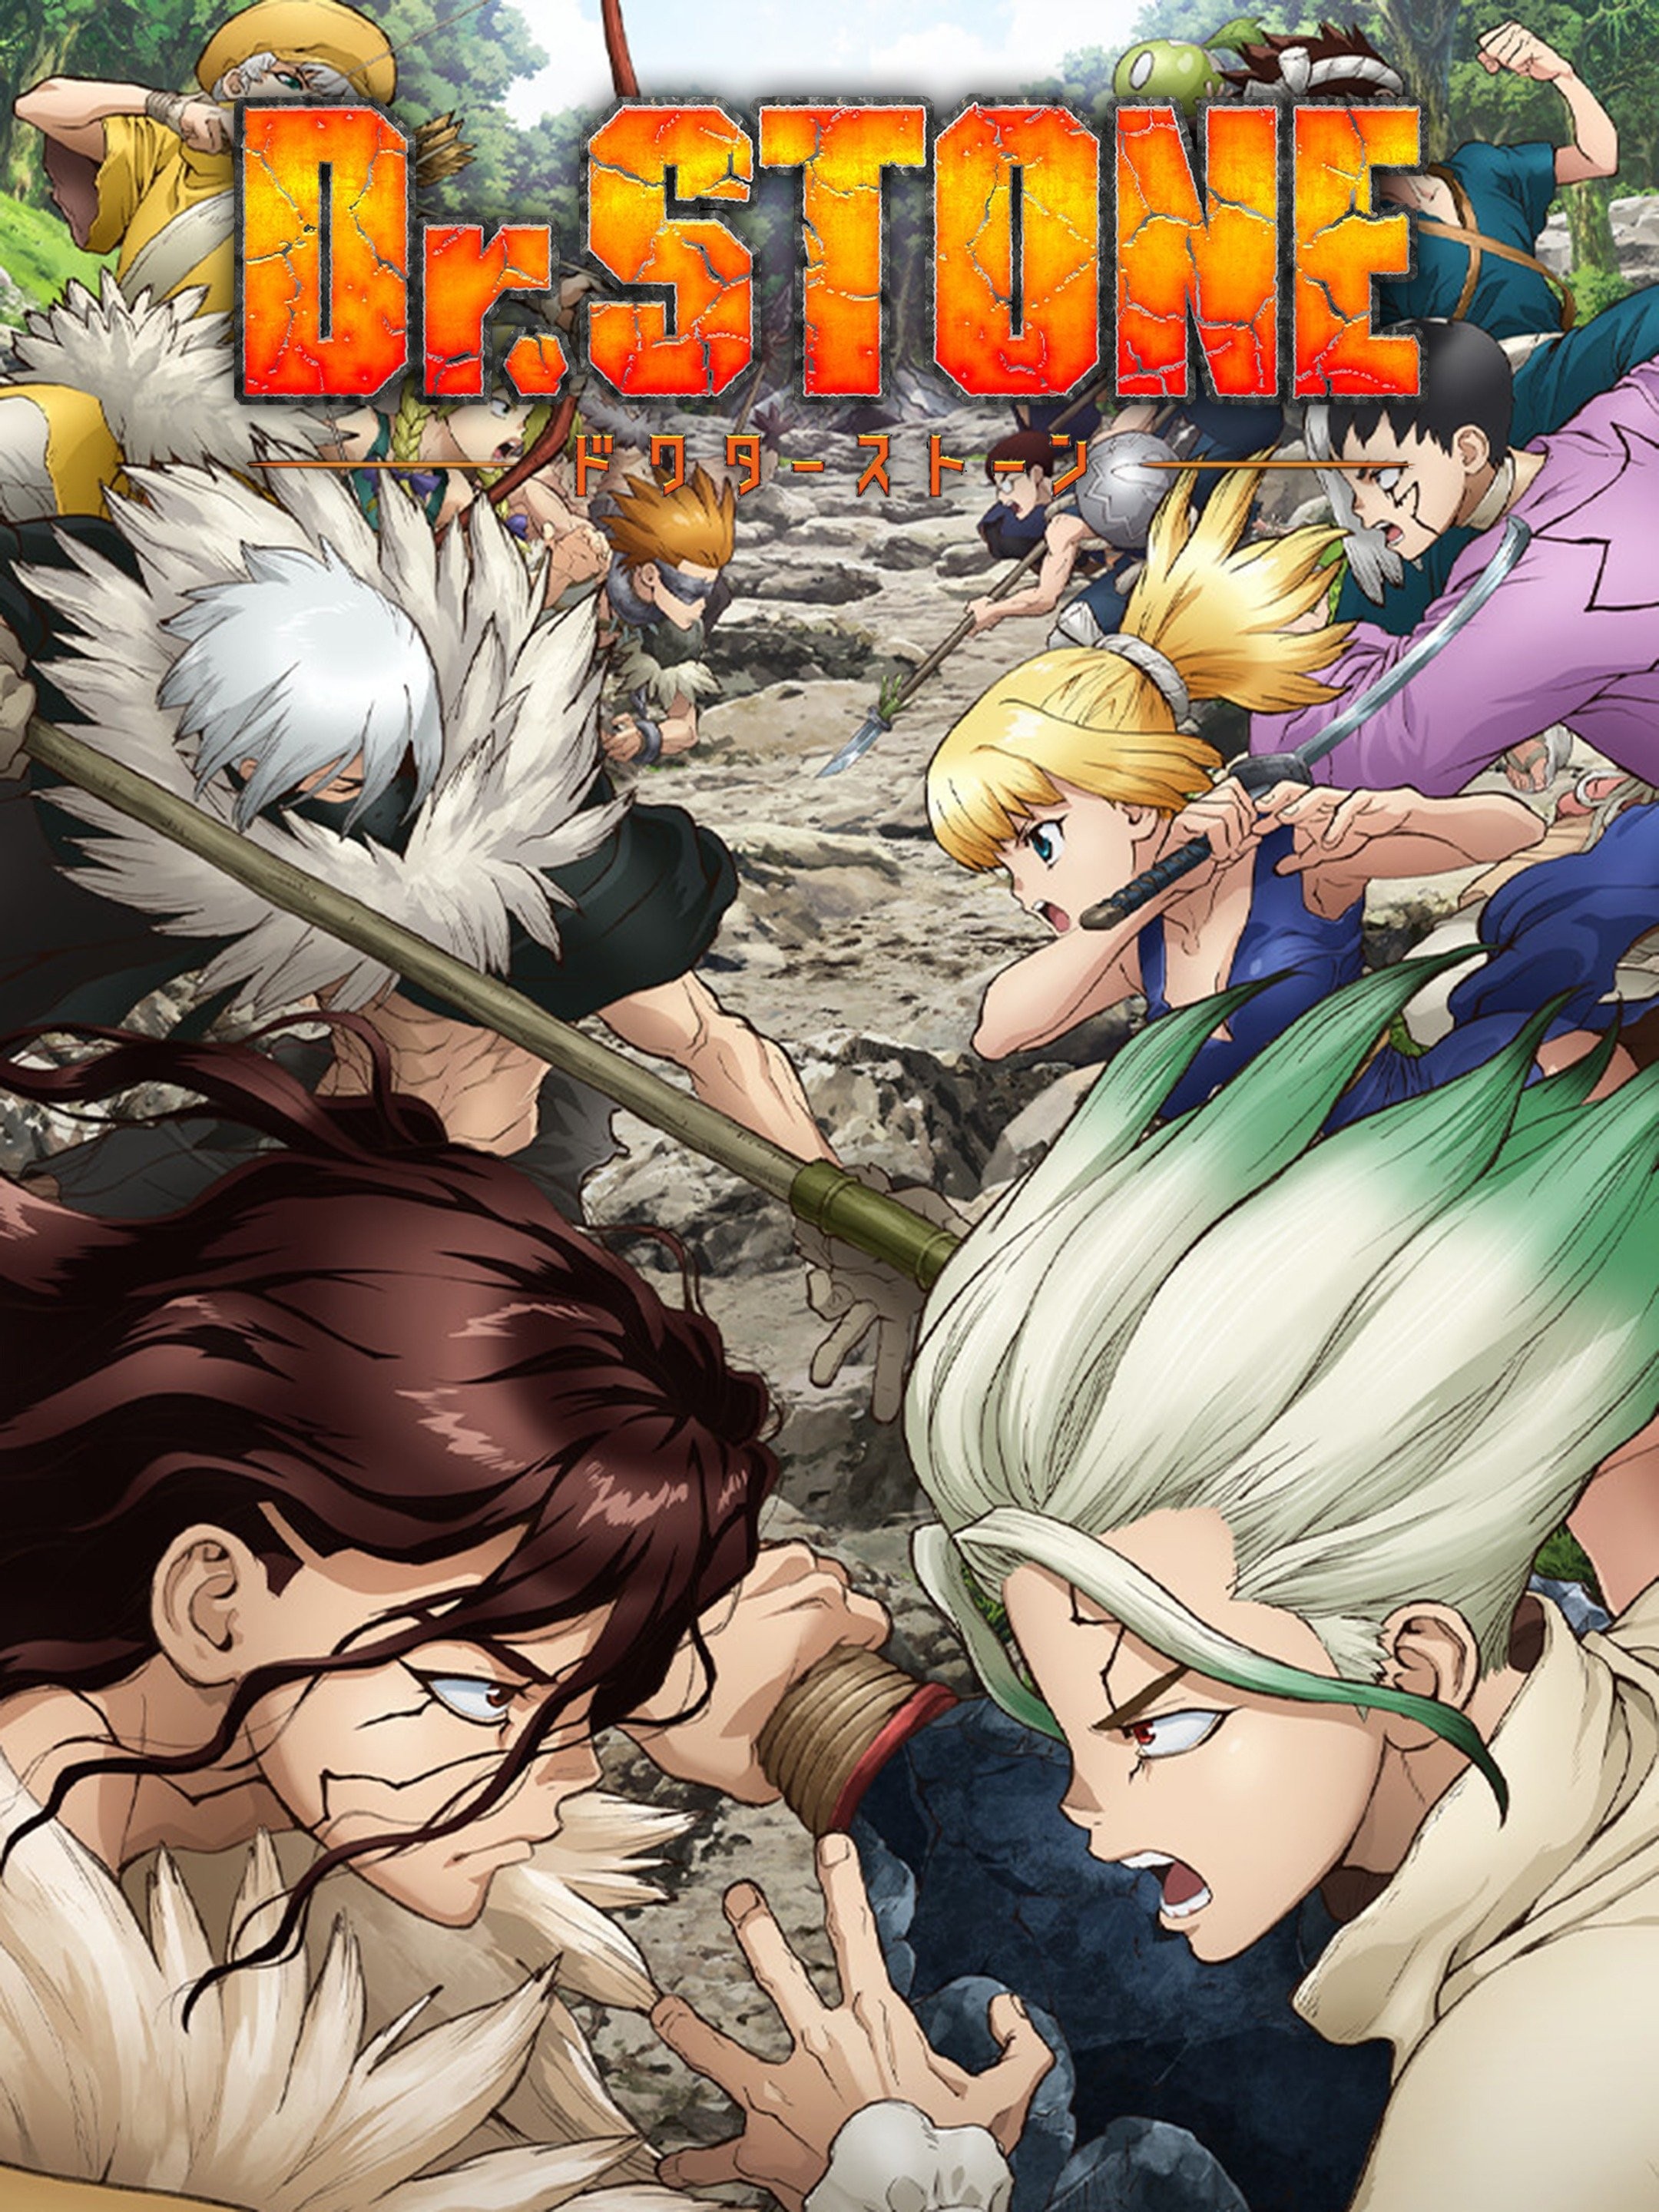 Dr. Stone - Rotten Tomatoes